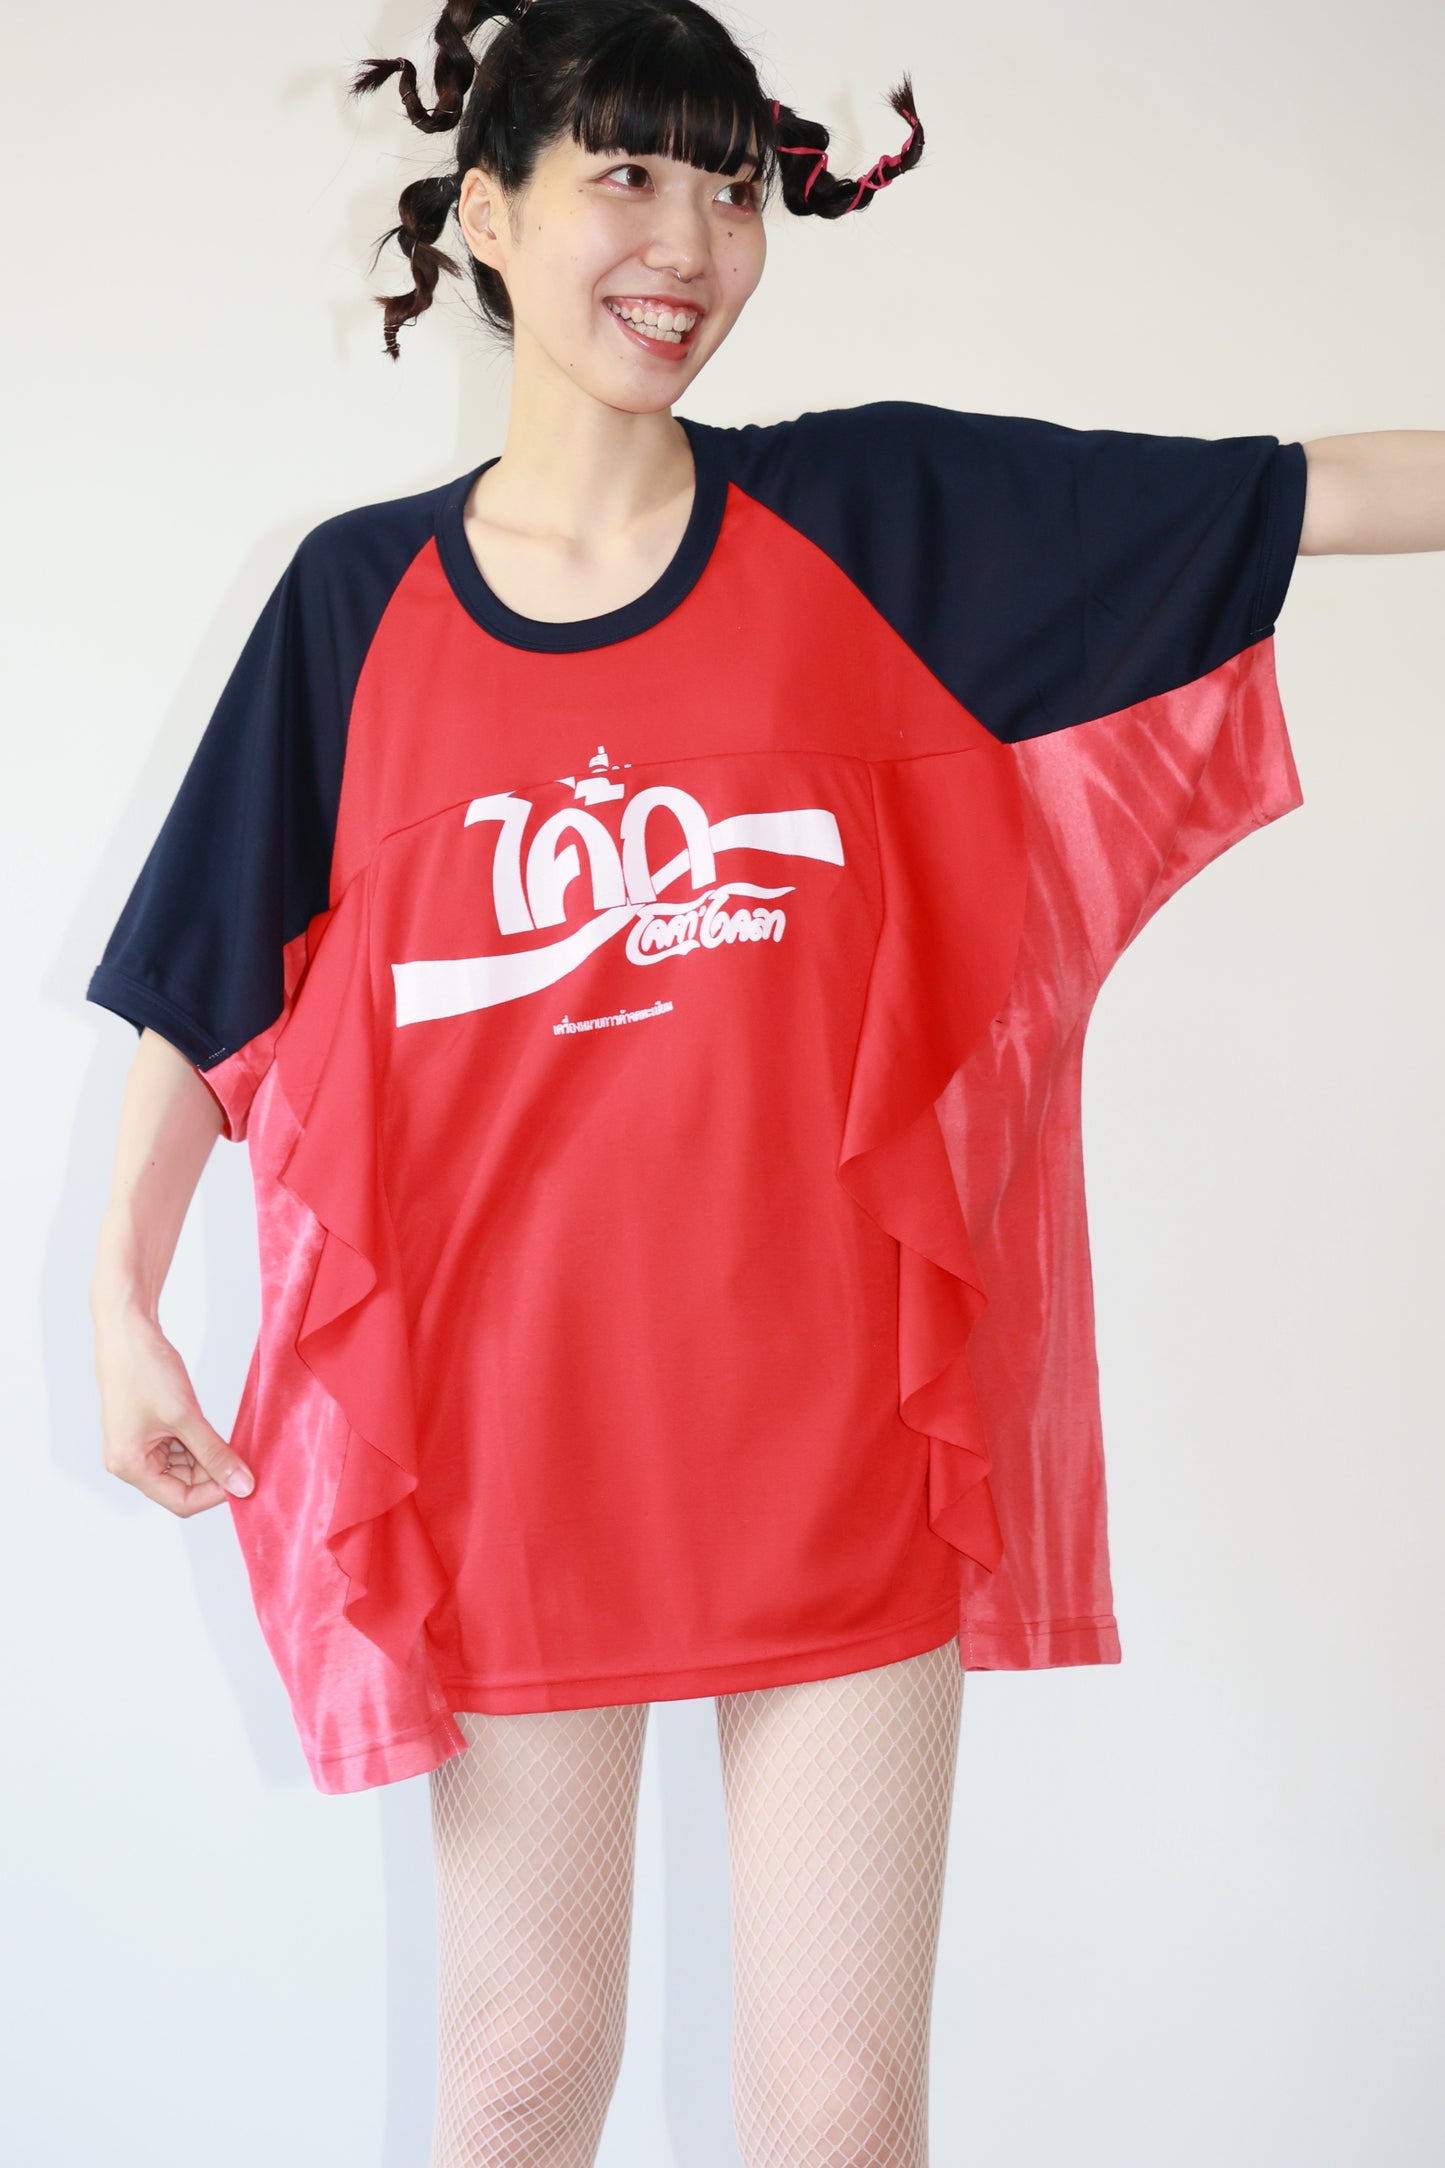 POTTOxUDW UP-CYCLED TIE-DYED T-SHIRTS, RAGLAN RED